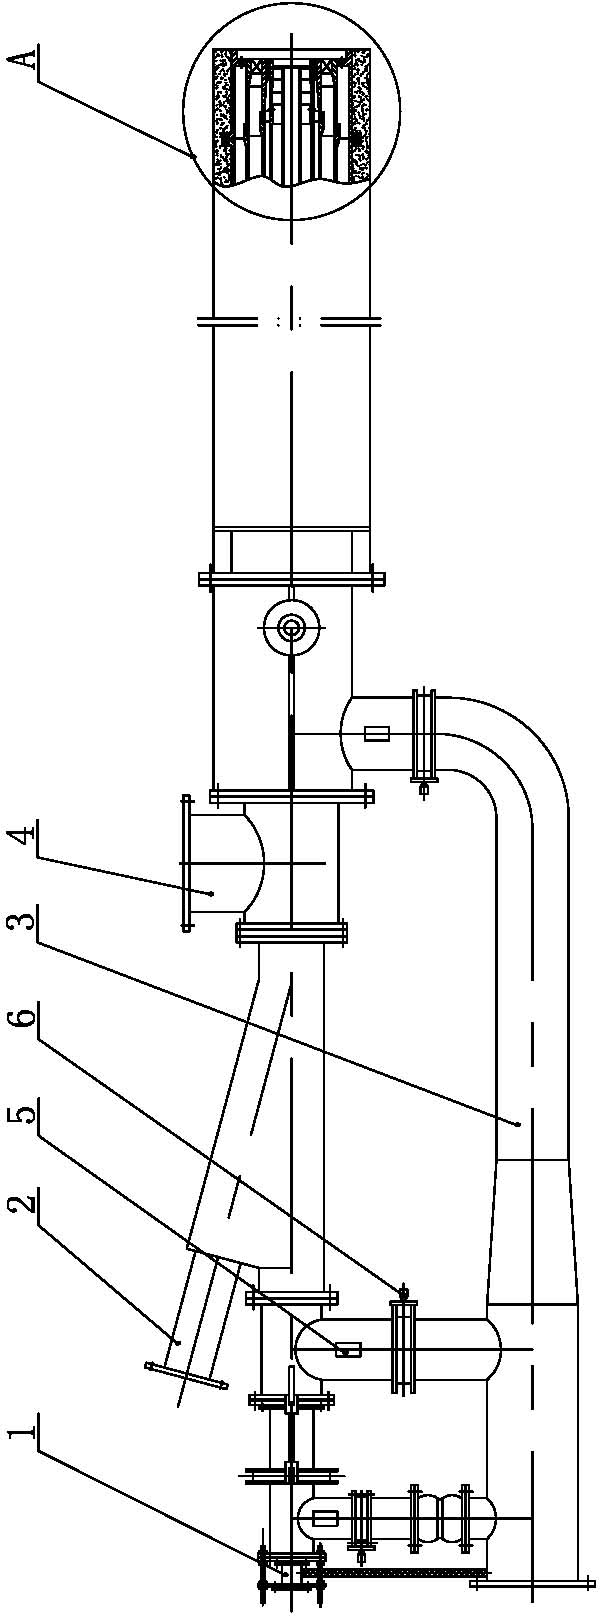 Multi-channel mixed fuel burner